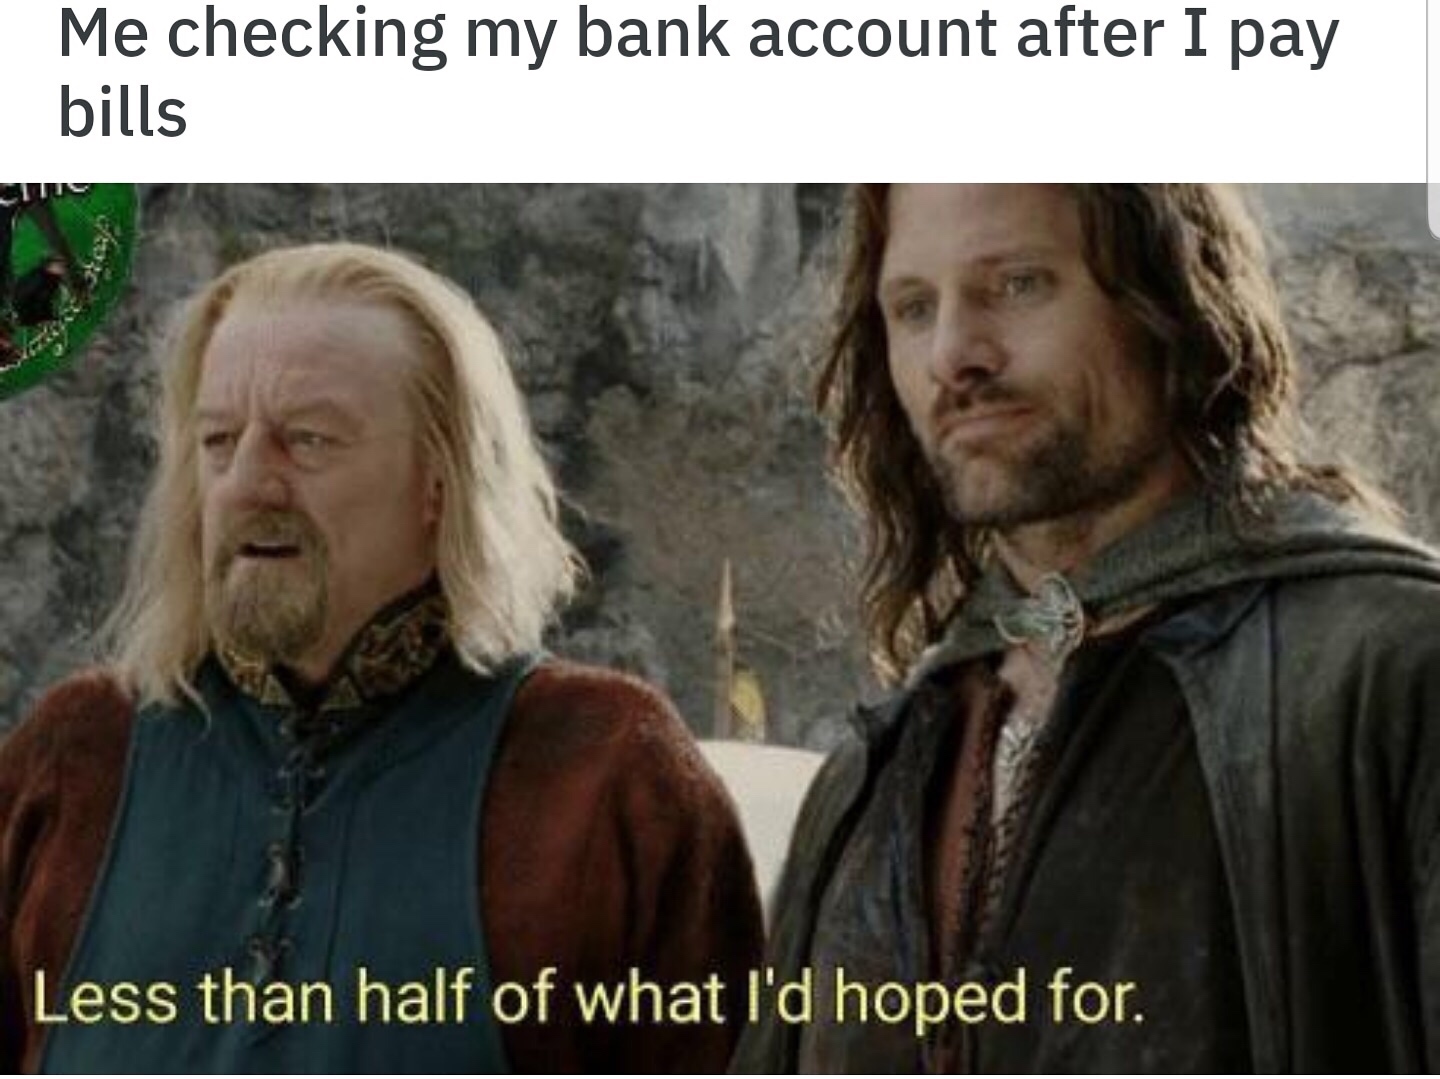 lord of the rings meme - Me checking my bank account after I pay bills Less than half of what I'd hoped for.